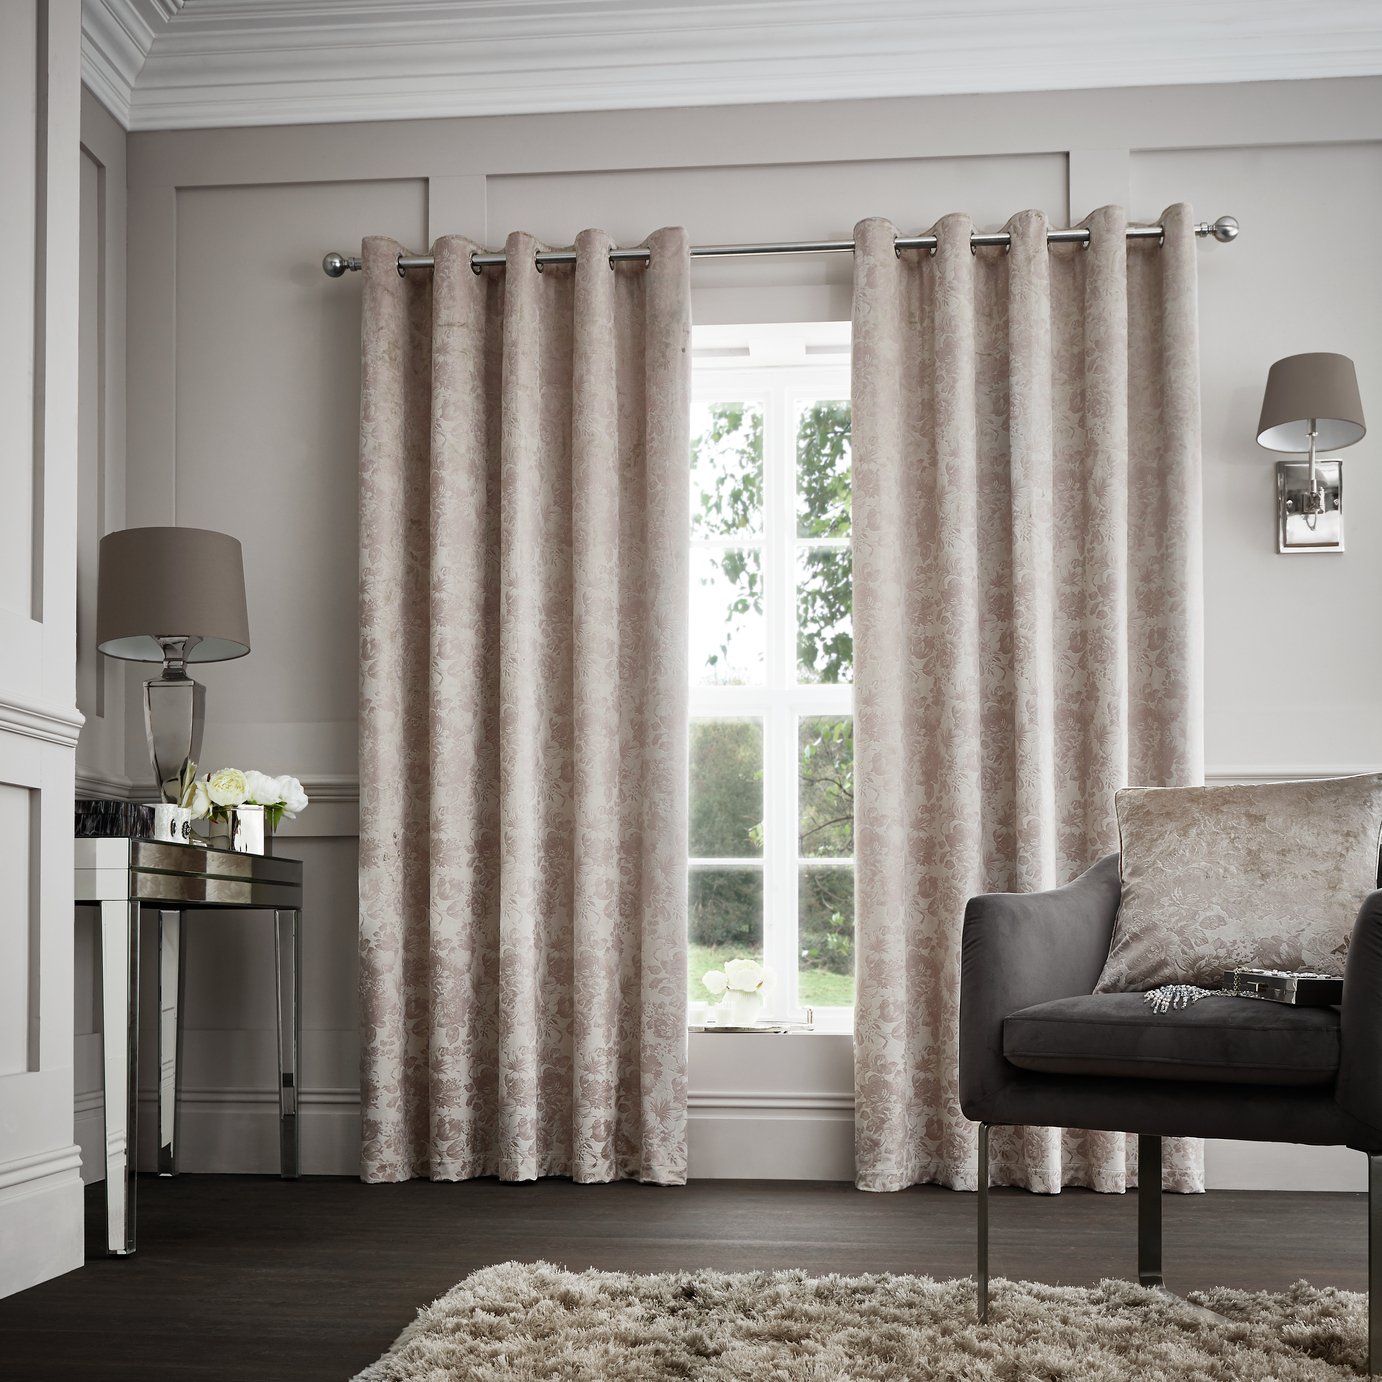 Curtina Downton Lined Curtains - 168x183cm - Mink